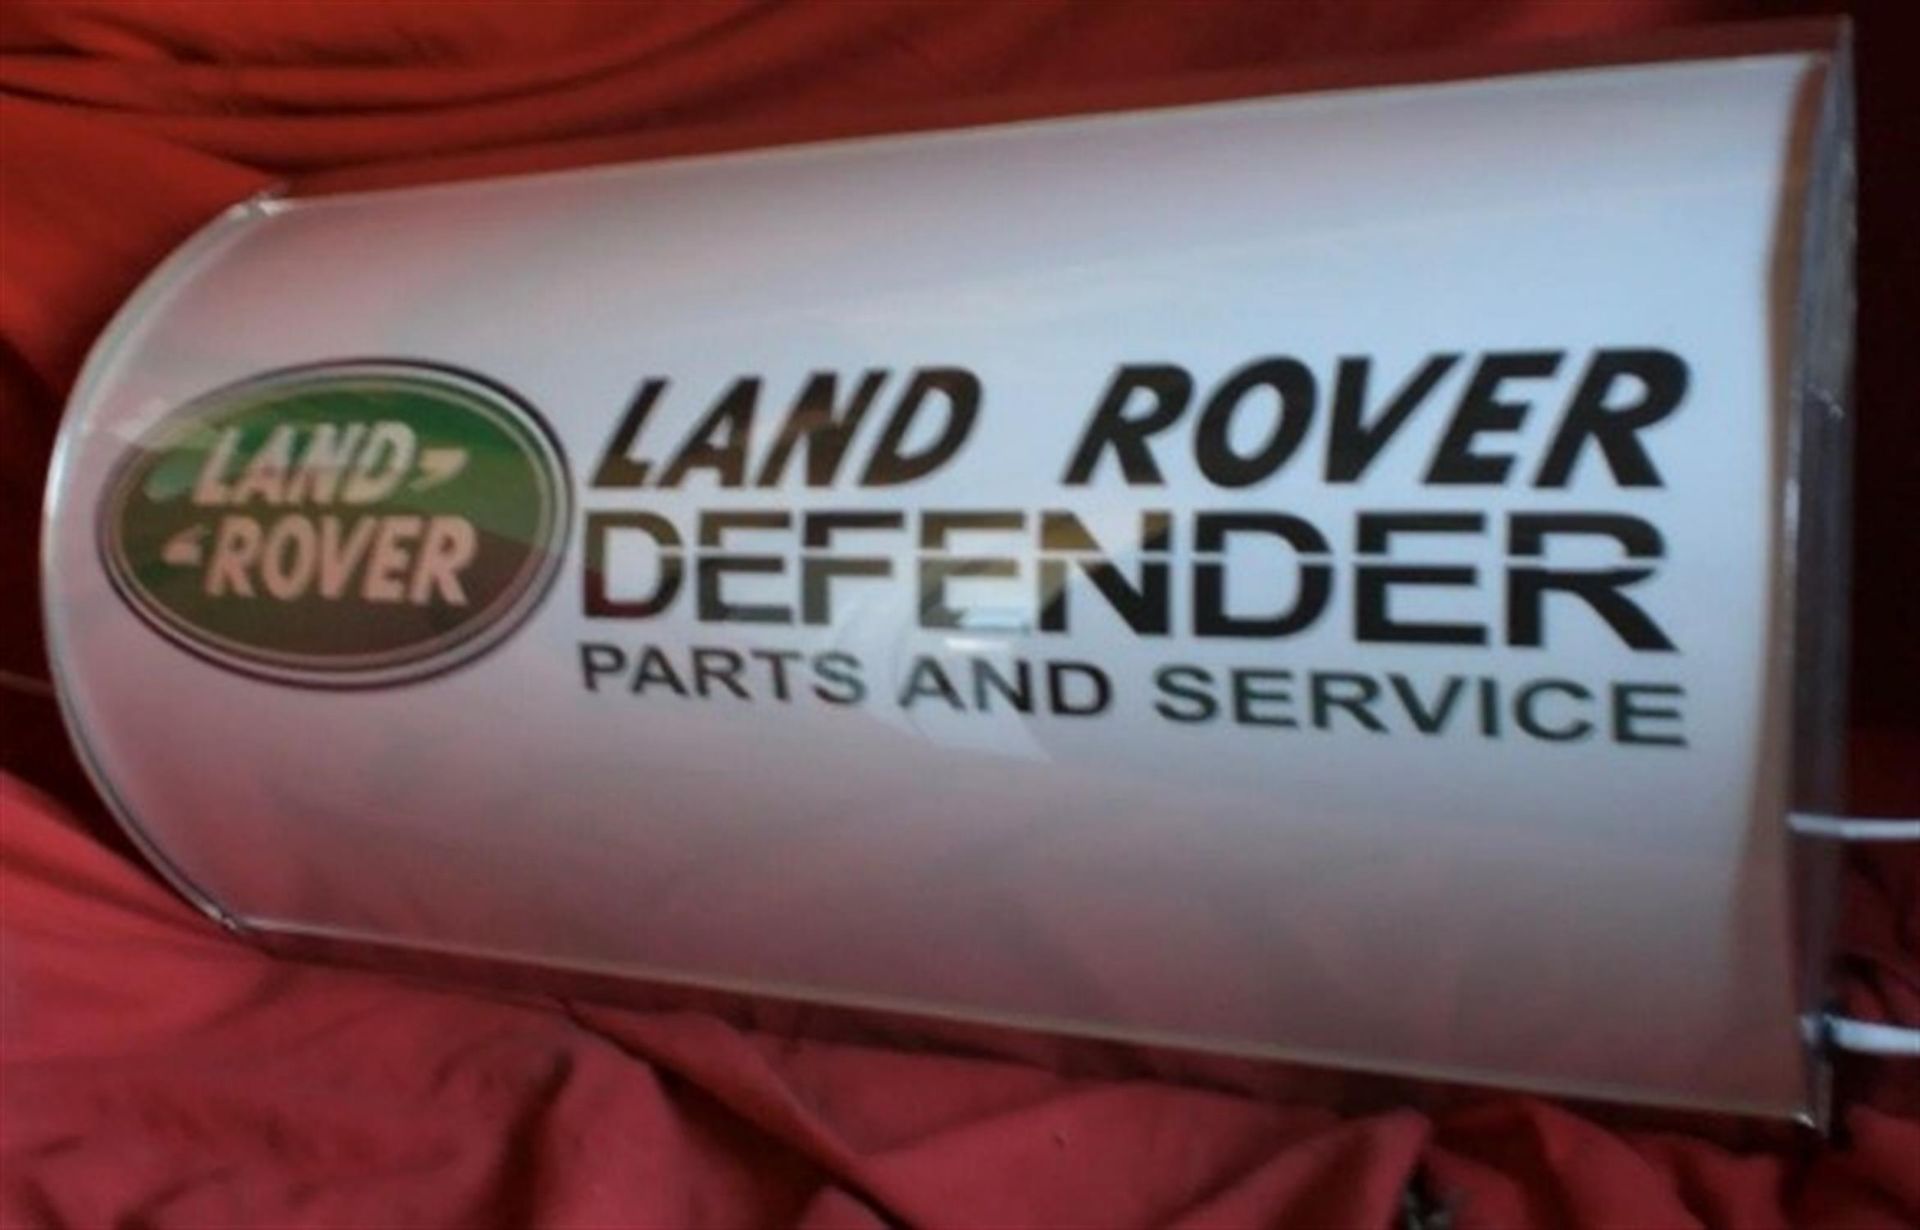 A Contemporary Land Rover-Themed Convex Illuminated Wall Sign - Image 2 of 2